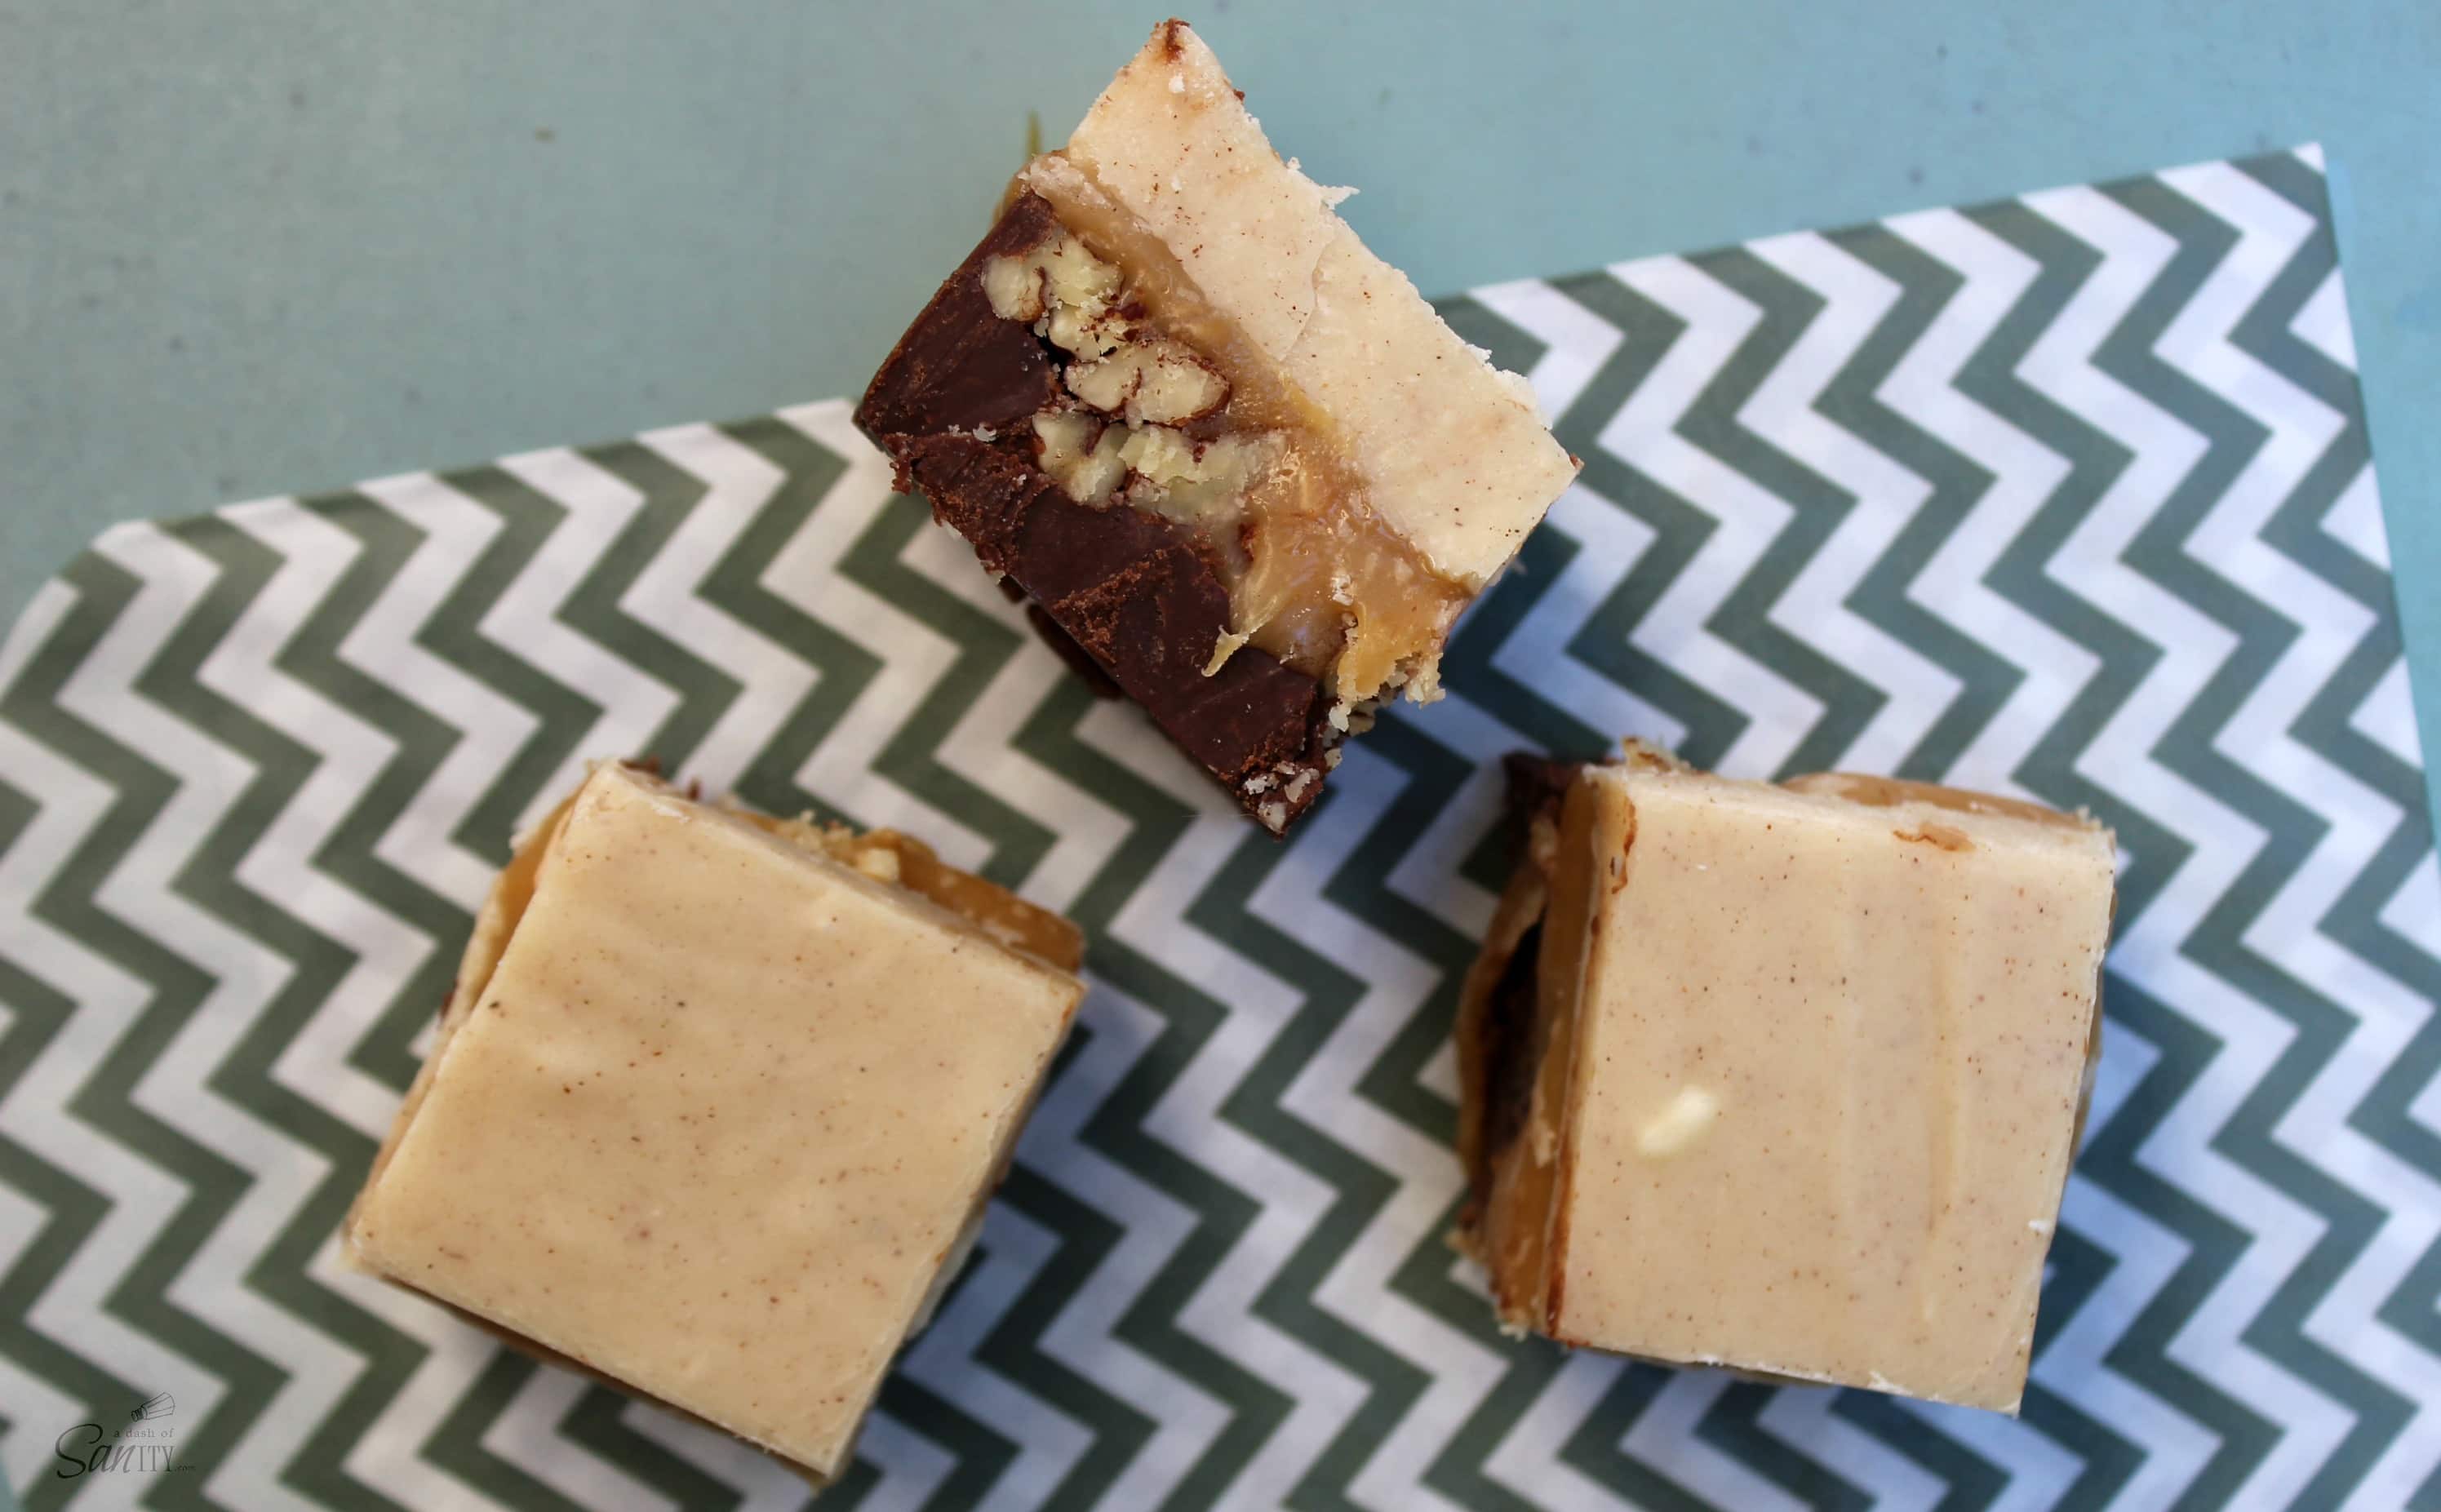 Pumpkin Spice Turtle Fudge is made with layers of chocolate, caramel, and pecans. This traditional fudge recipe just got a new fall twist.